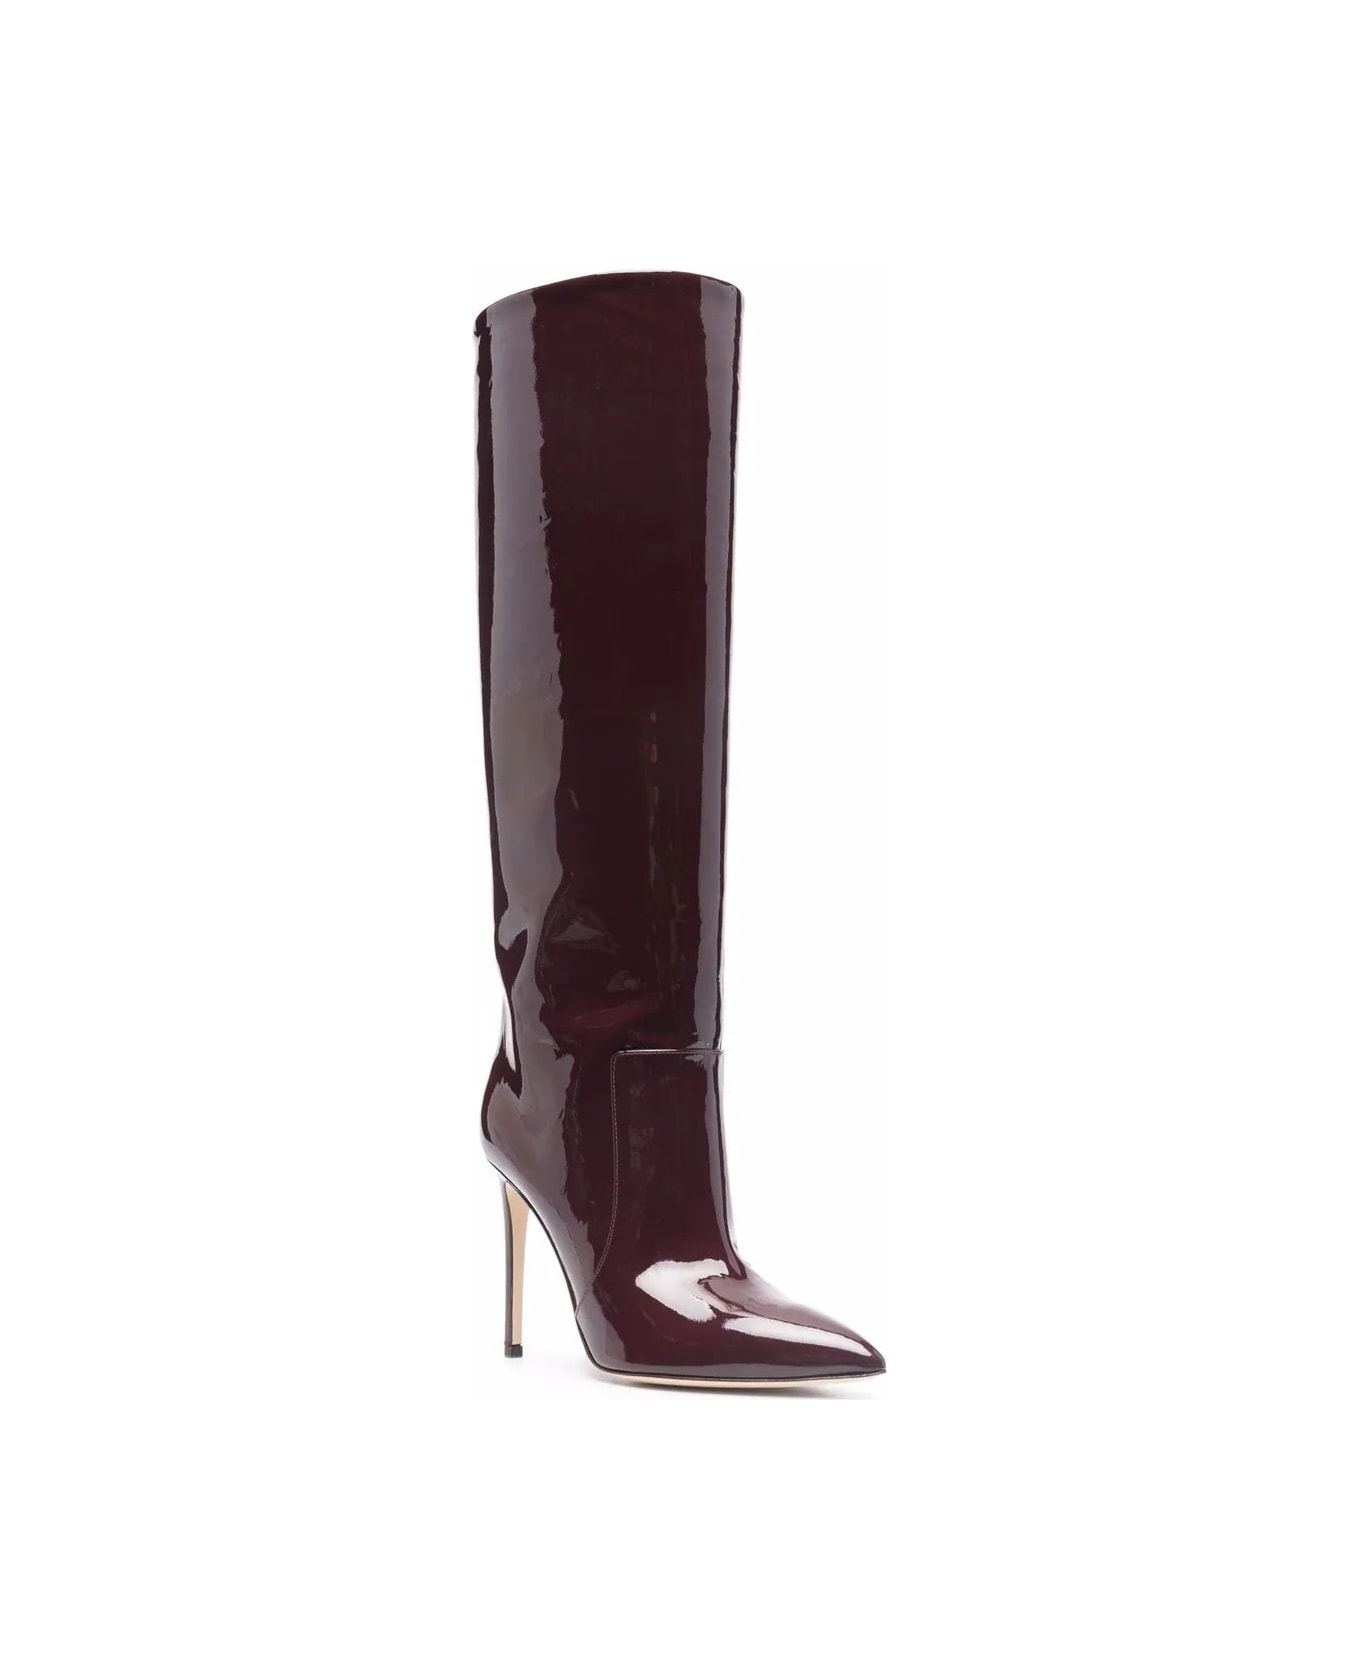 Paris Texas 105 Stiletto Boot In Burgundy Patent Leather - Red ブーツ